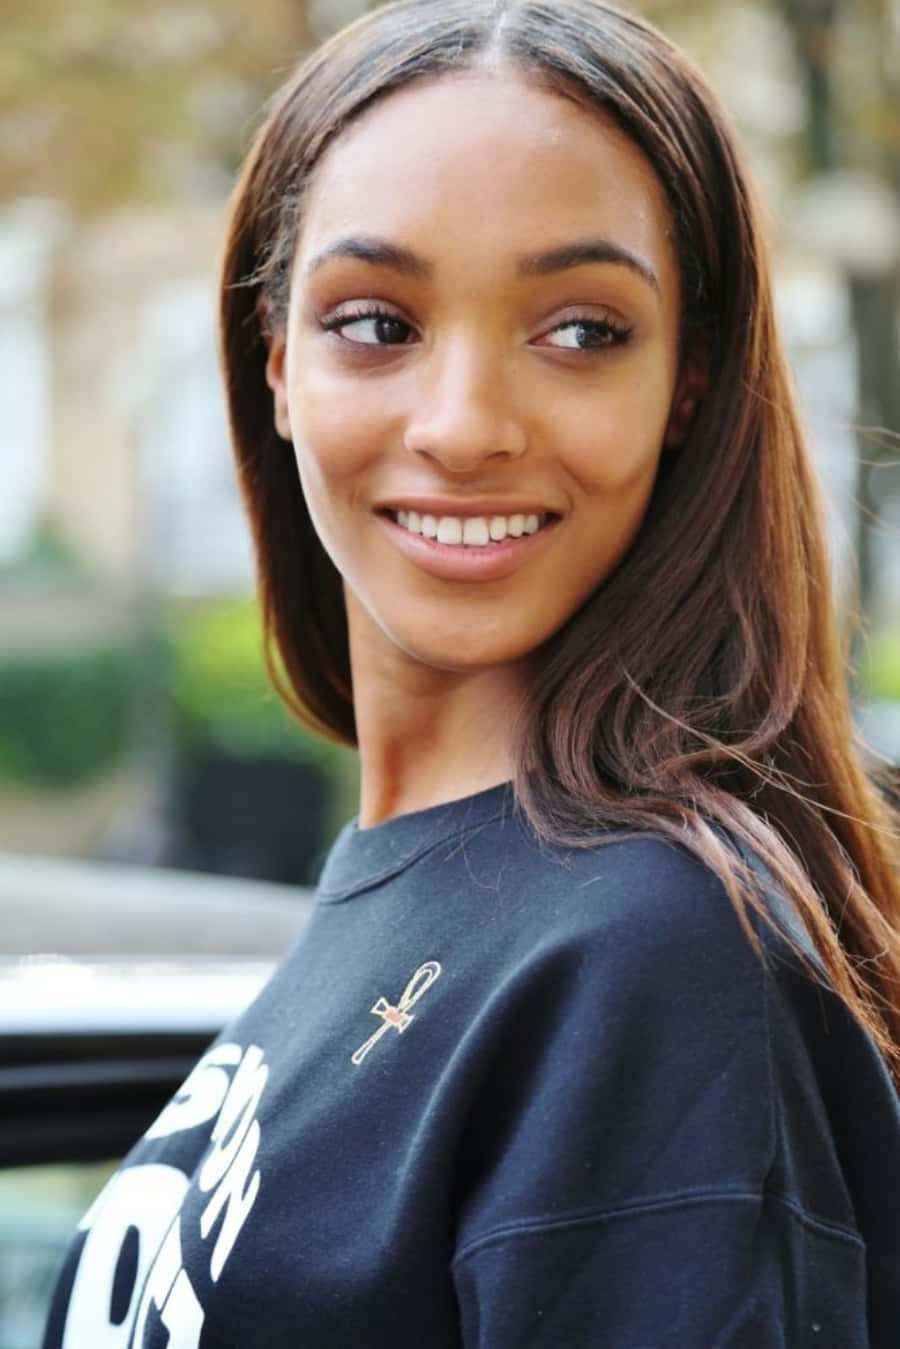 Fashionable Jourdan Dunn Posing With A Confident Smile. Background